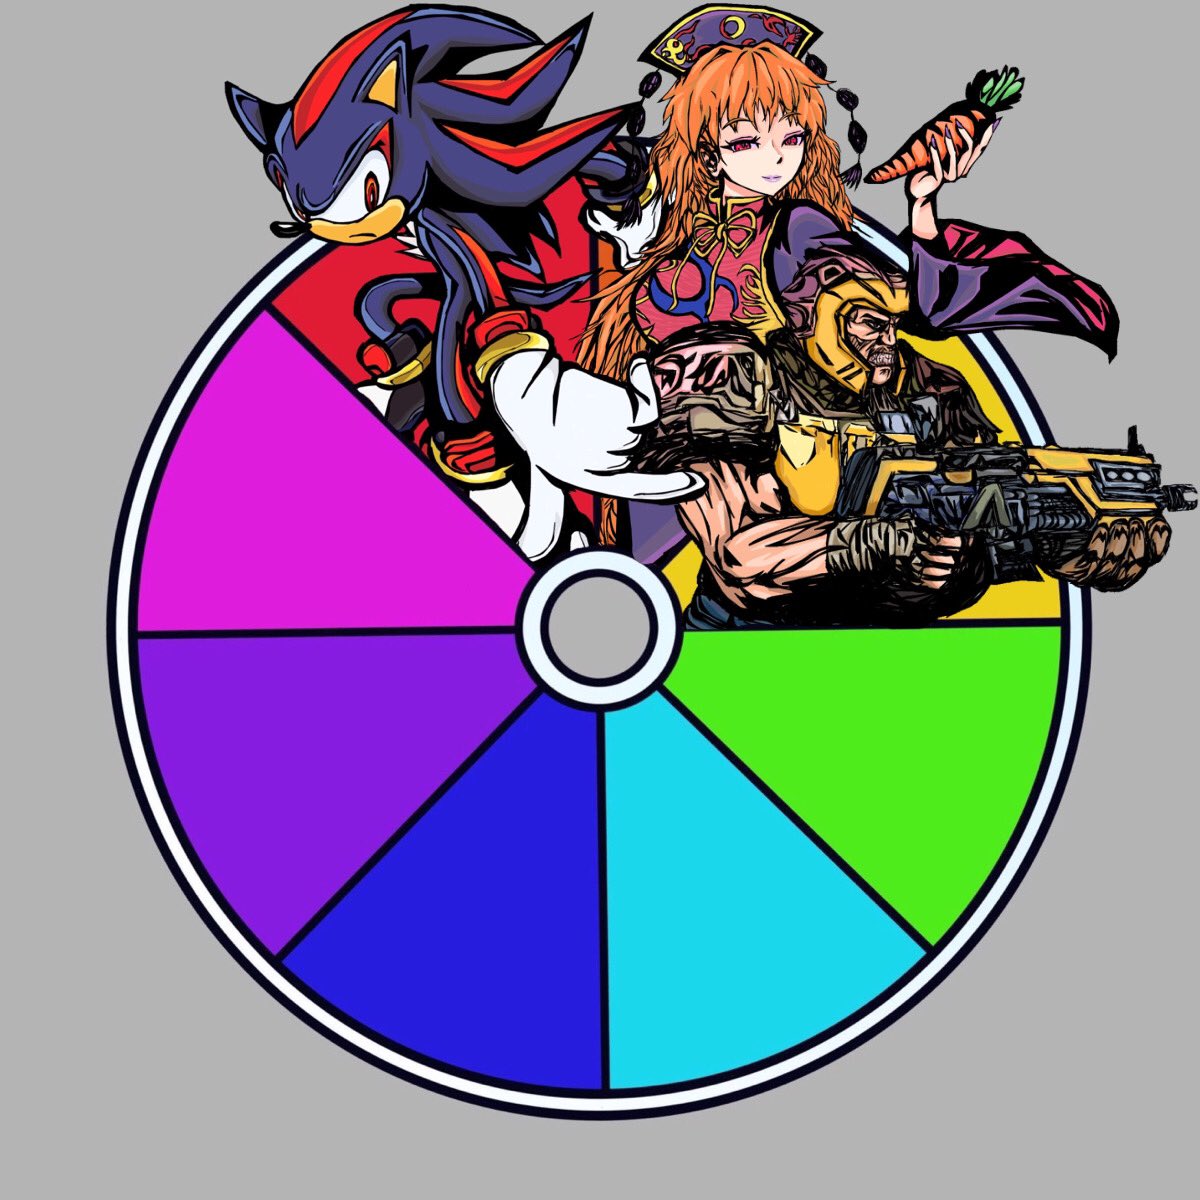 Since I'm following orders, Quake Marine conquers the yellow slice. Seems this classic shooter won't settle for Shub.
Give me your choices for the green slice!

#colorwheel #colorwheelchallenge